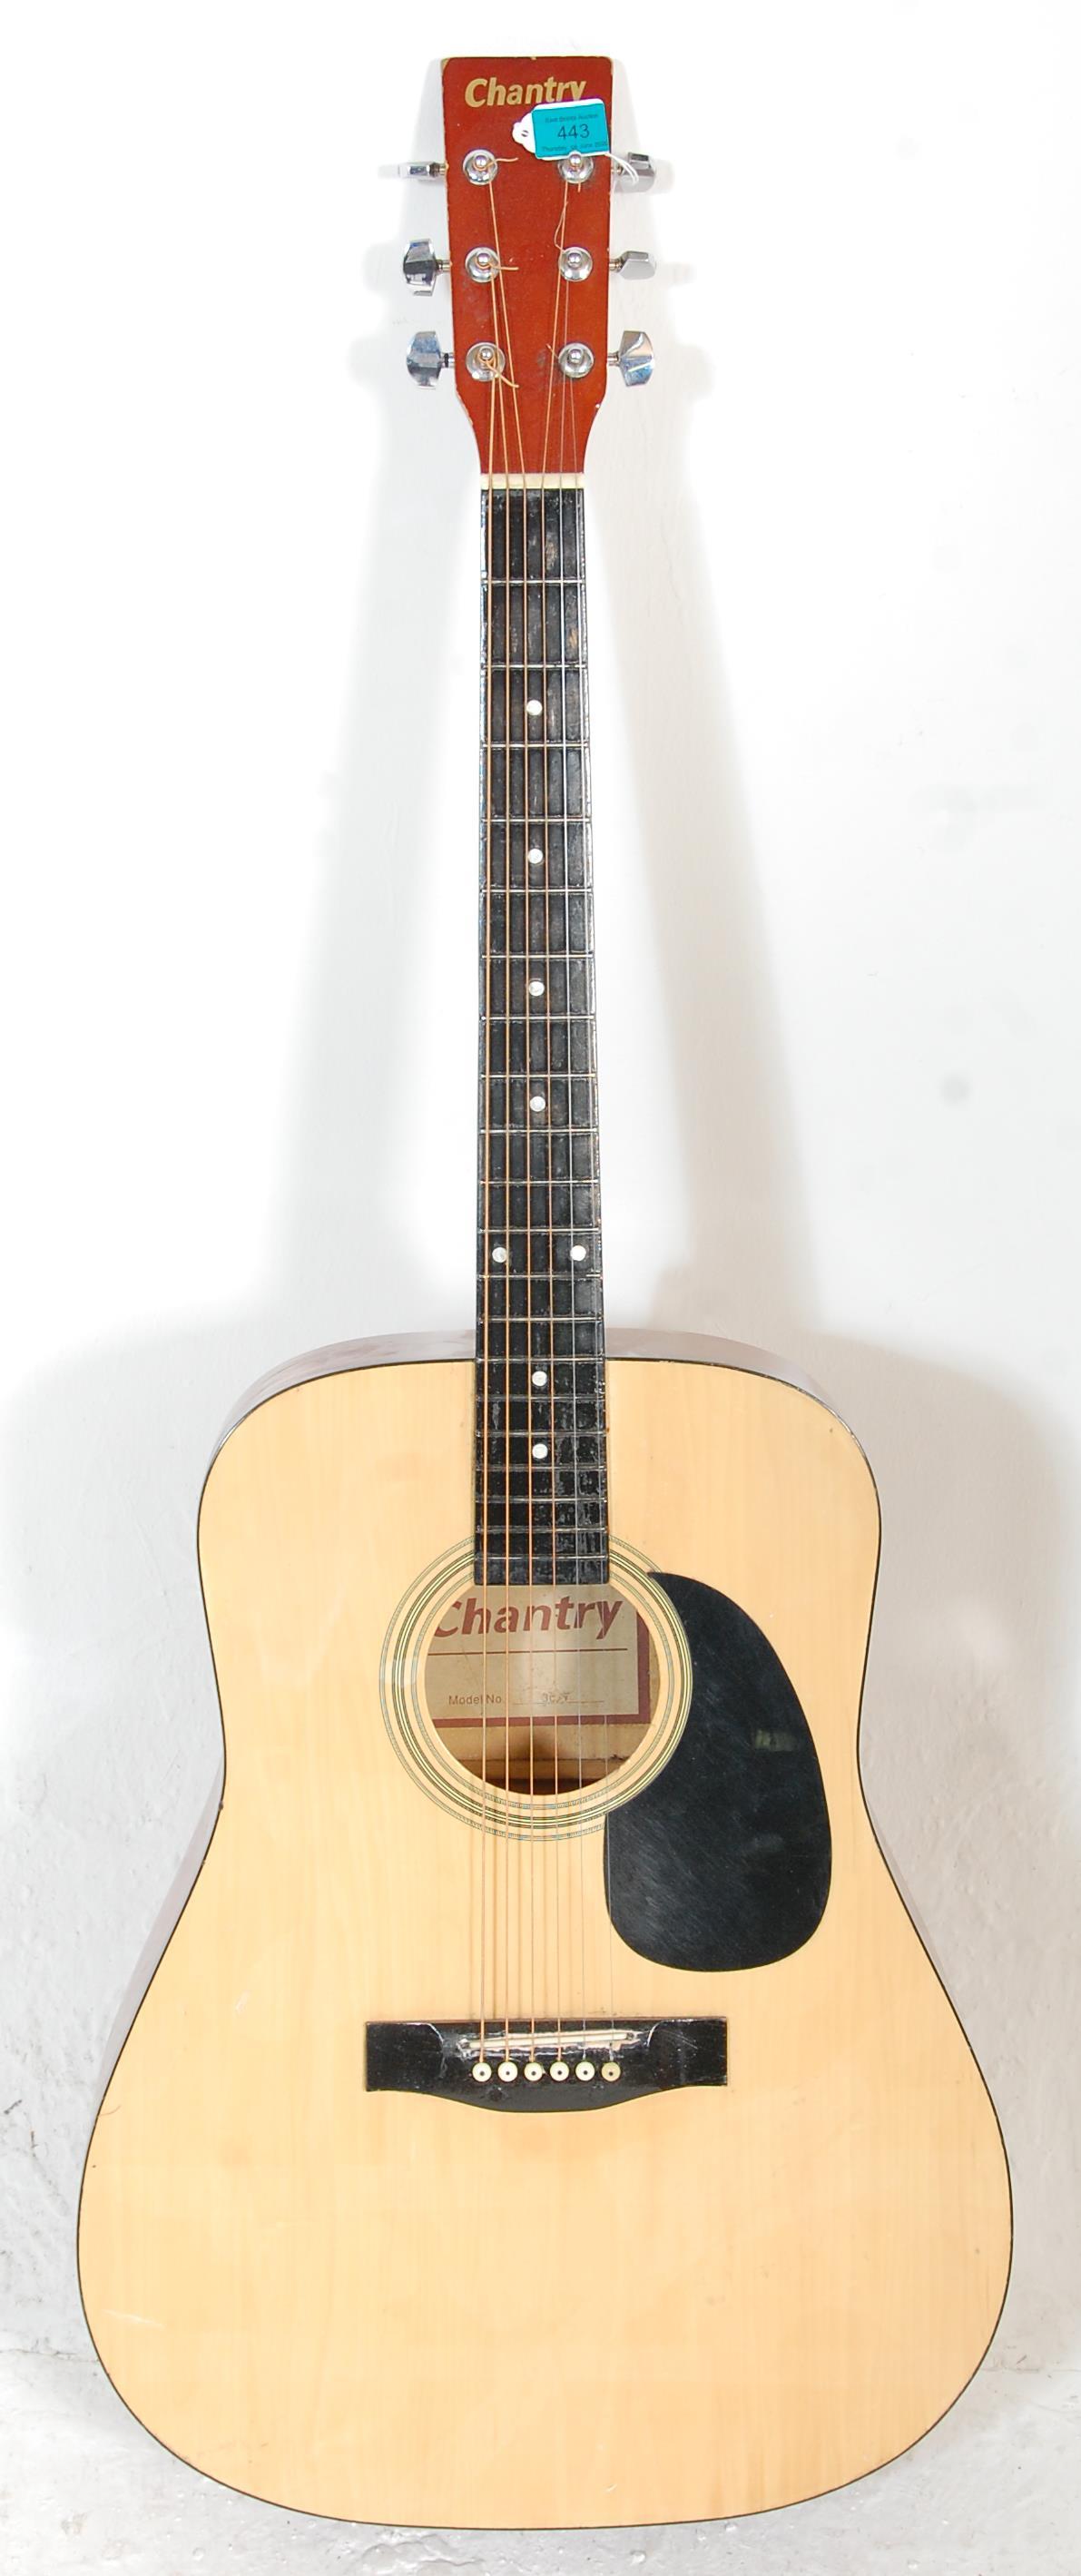 A good Chantry made acoustic guitar having a black scratch board inlaid fret board and chrome tuning